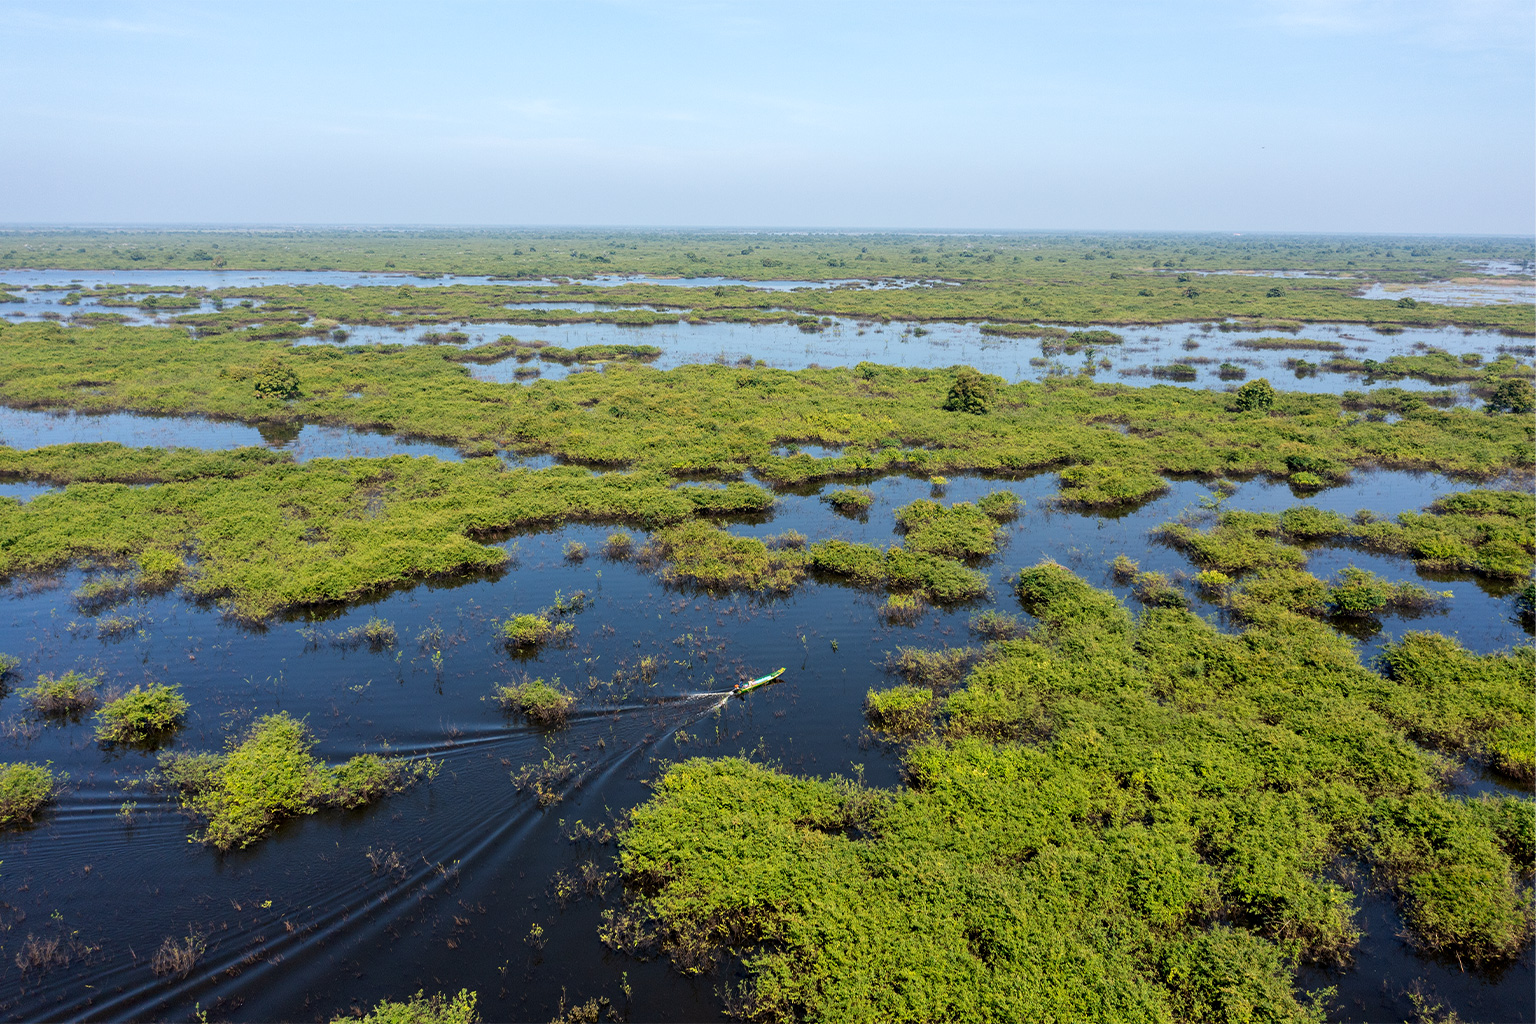 A longtail boat cuts across the flooded forest on Tonle Sap Lake.